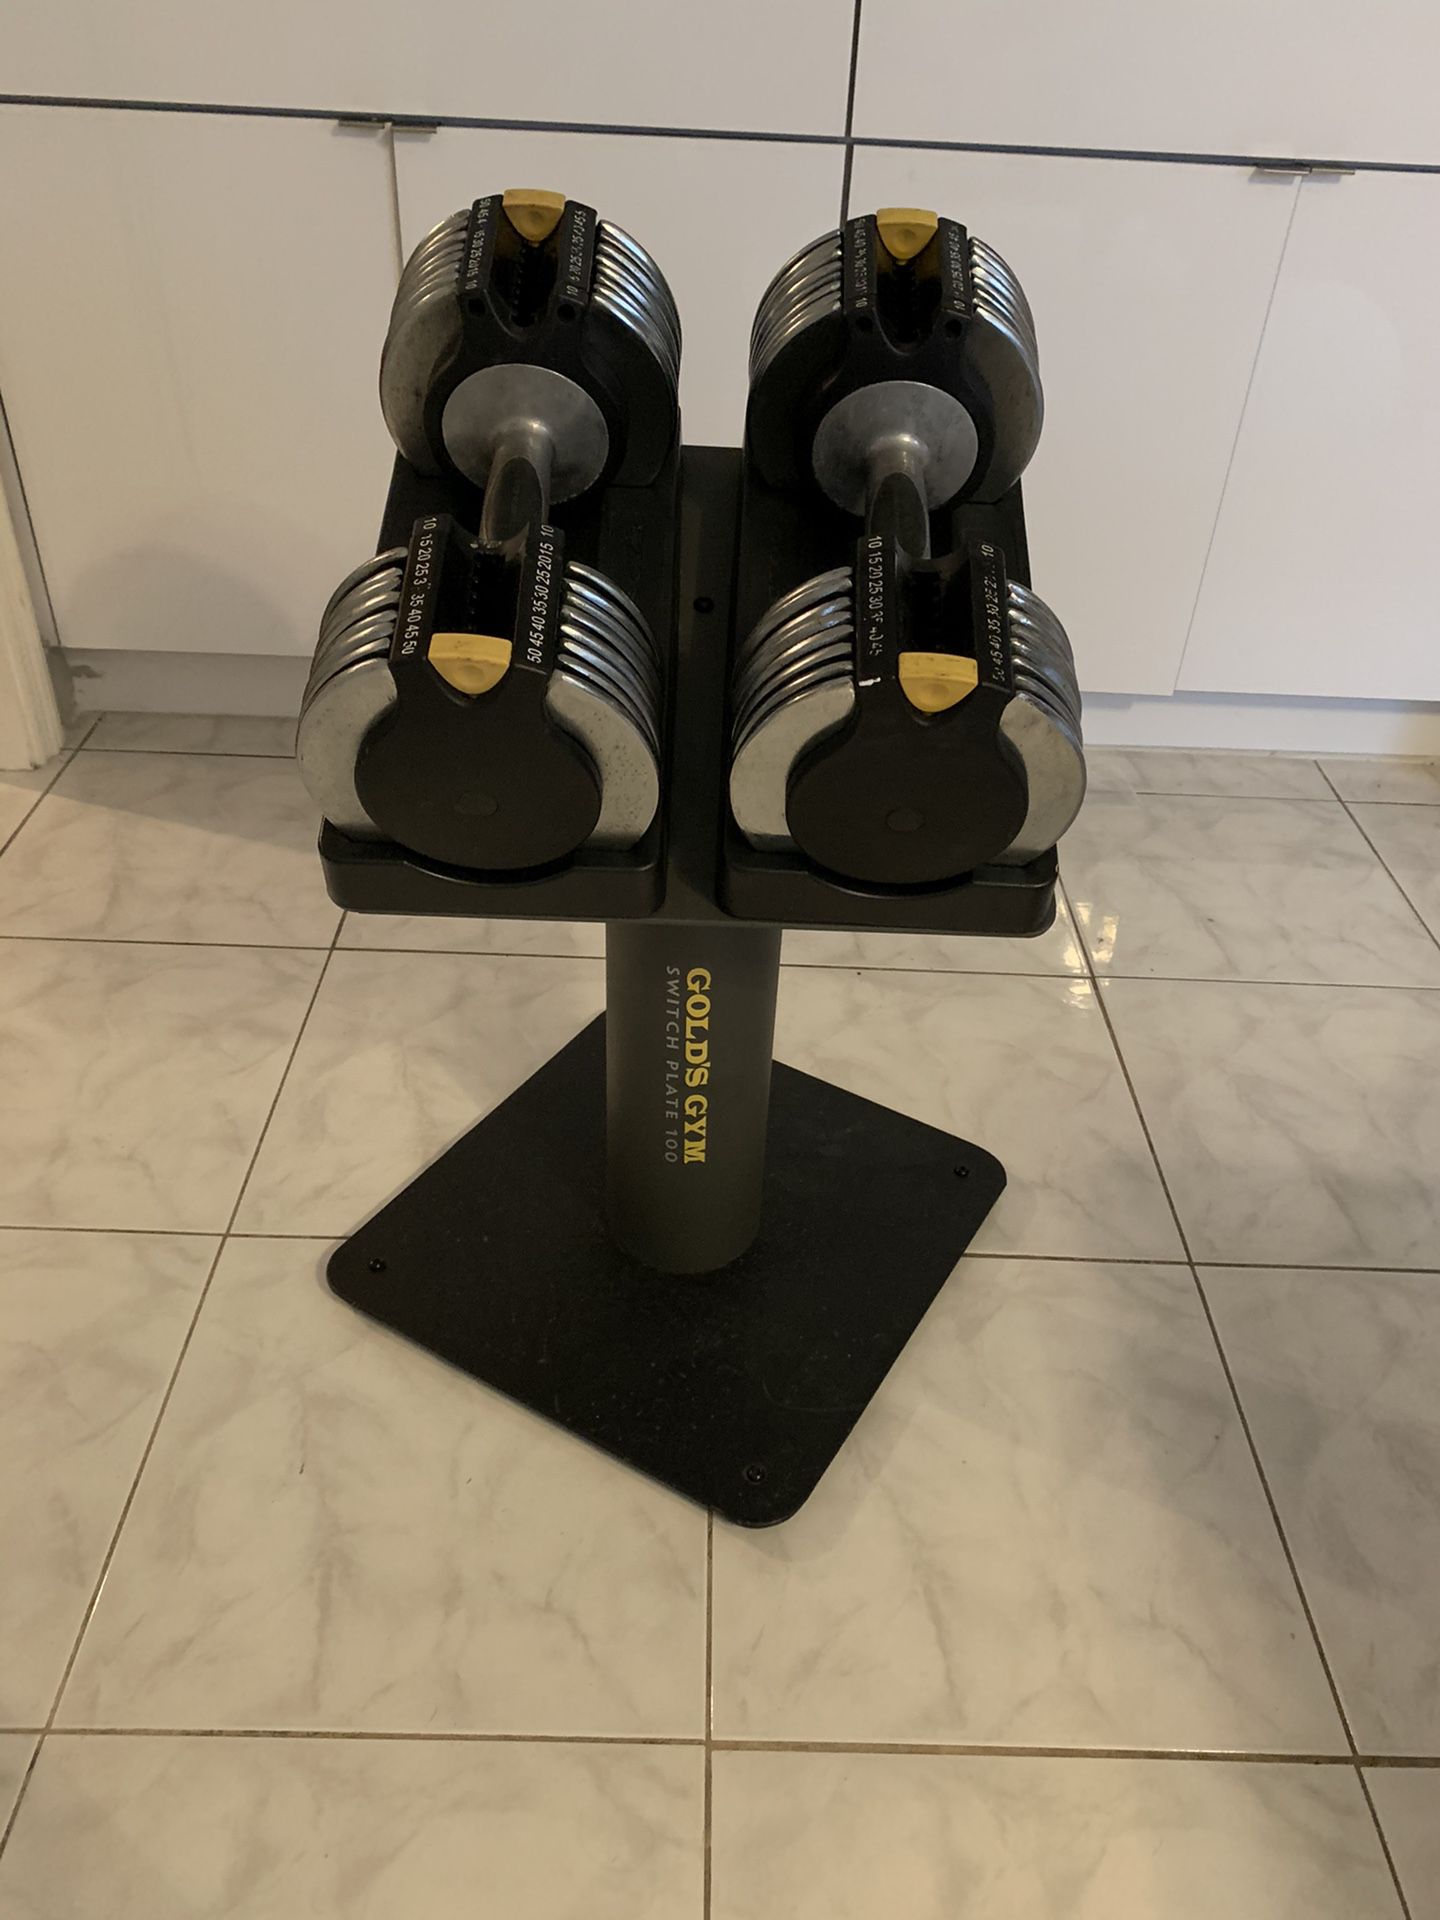 Adjustable Dumbbells with Stand